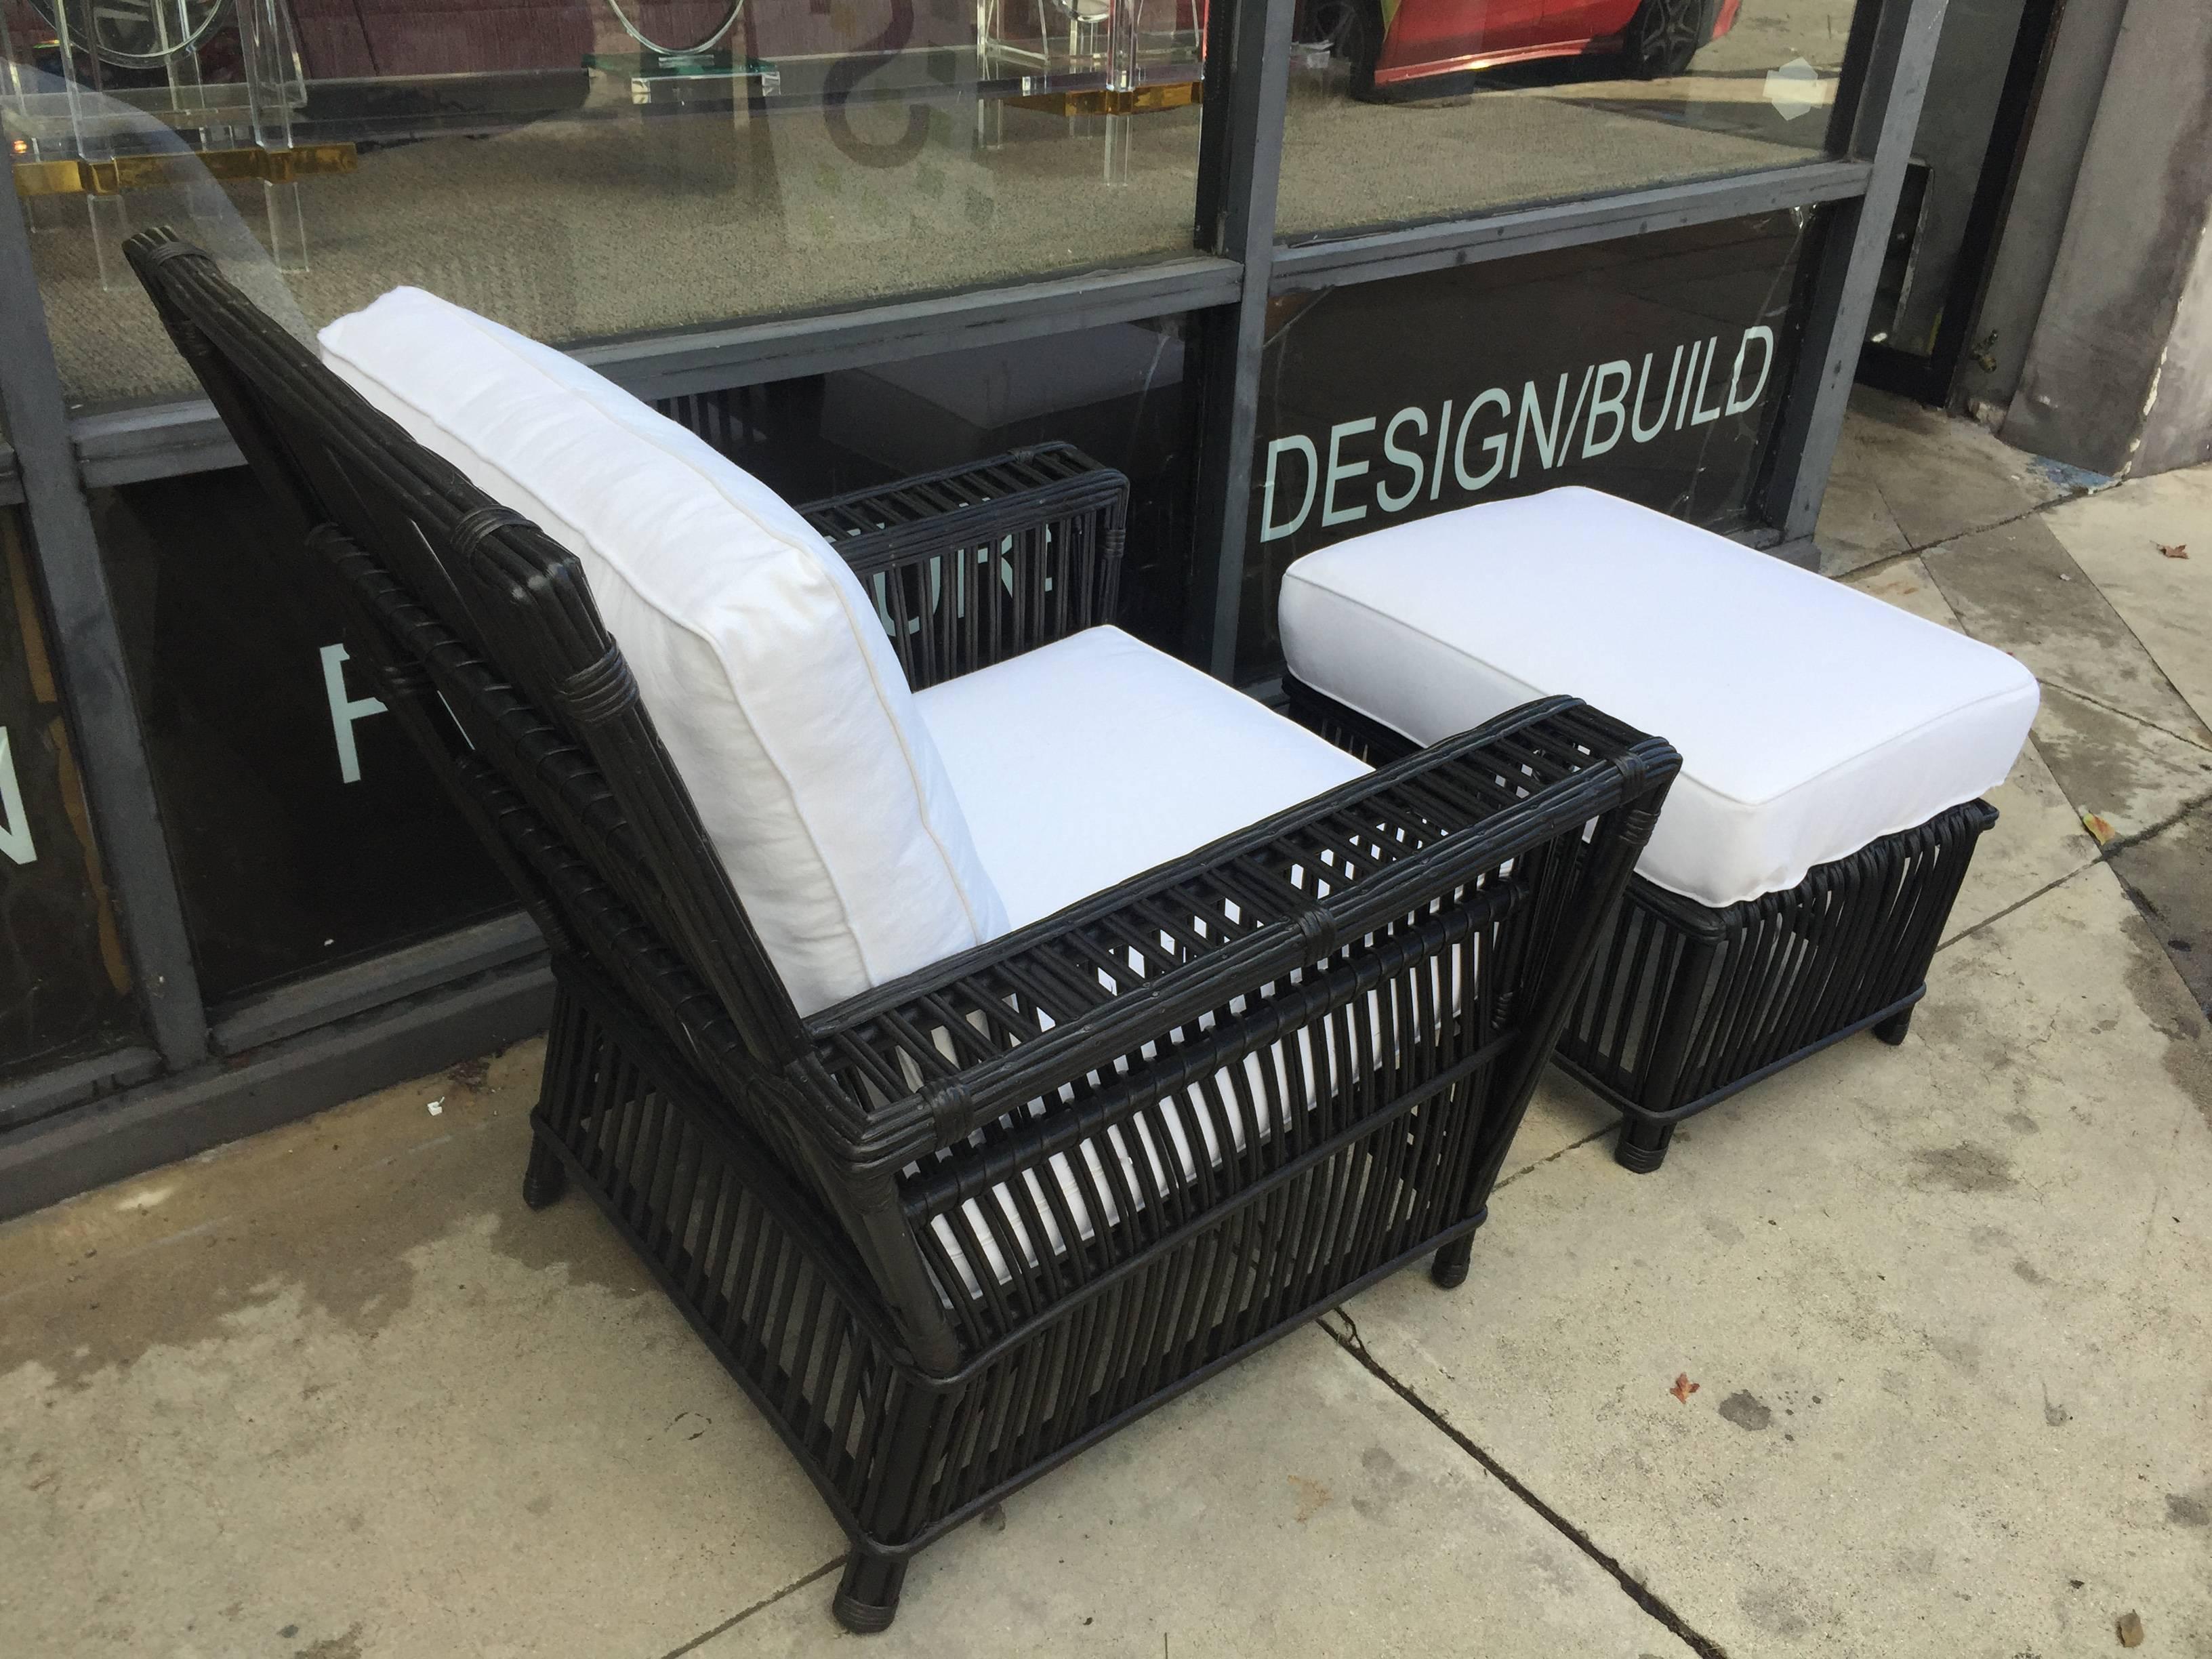 Mid-Century Modern Wicker or Bamboo Patio Chairs and Ottomans Upholstered in White Canvas